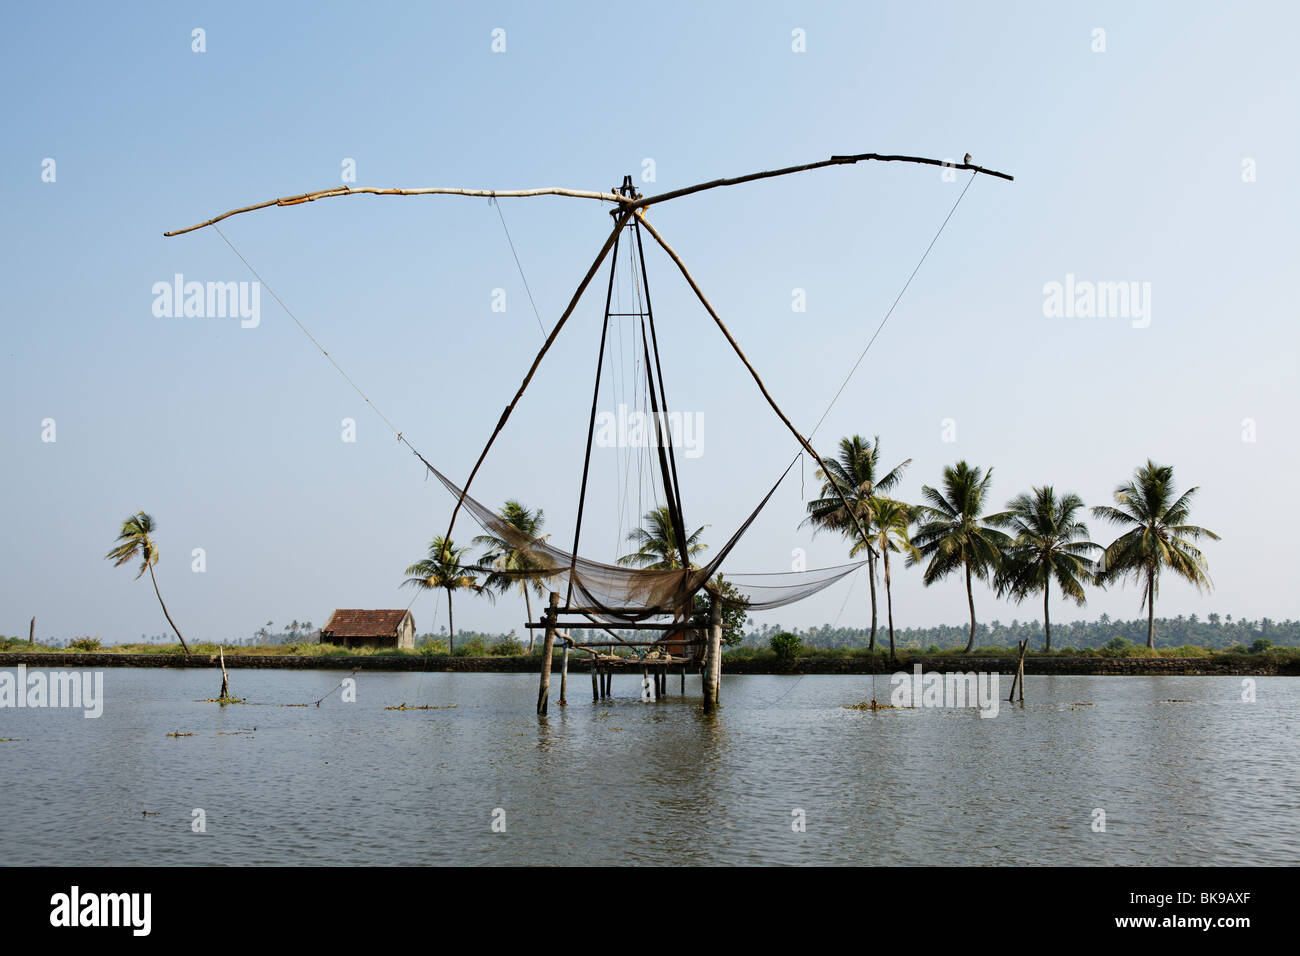 Chinese nets, huge hanging fishing nets, are one of the biggest sights in the backwaters of Ernakulam area, Kerala, India. Stock Photo